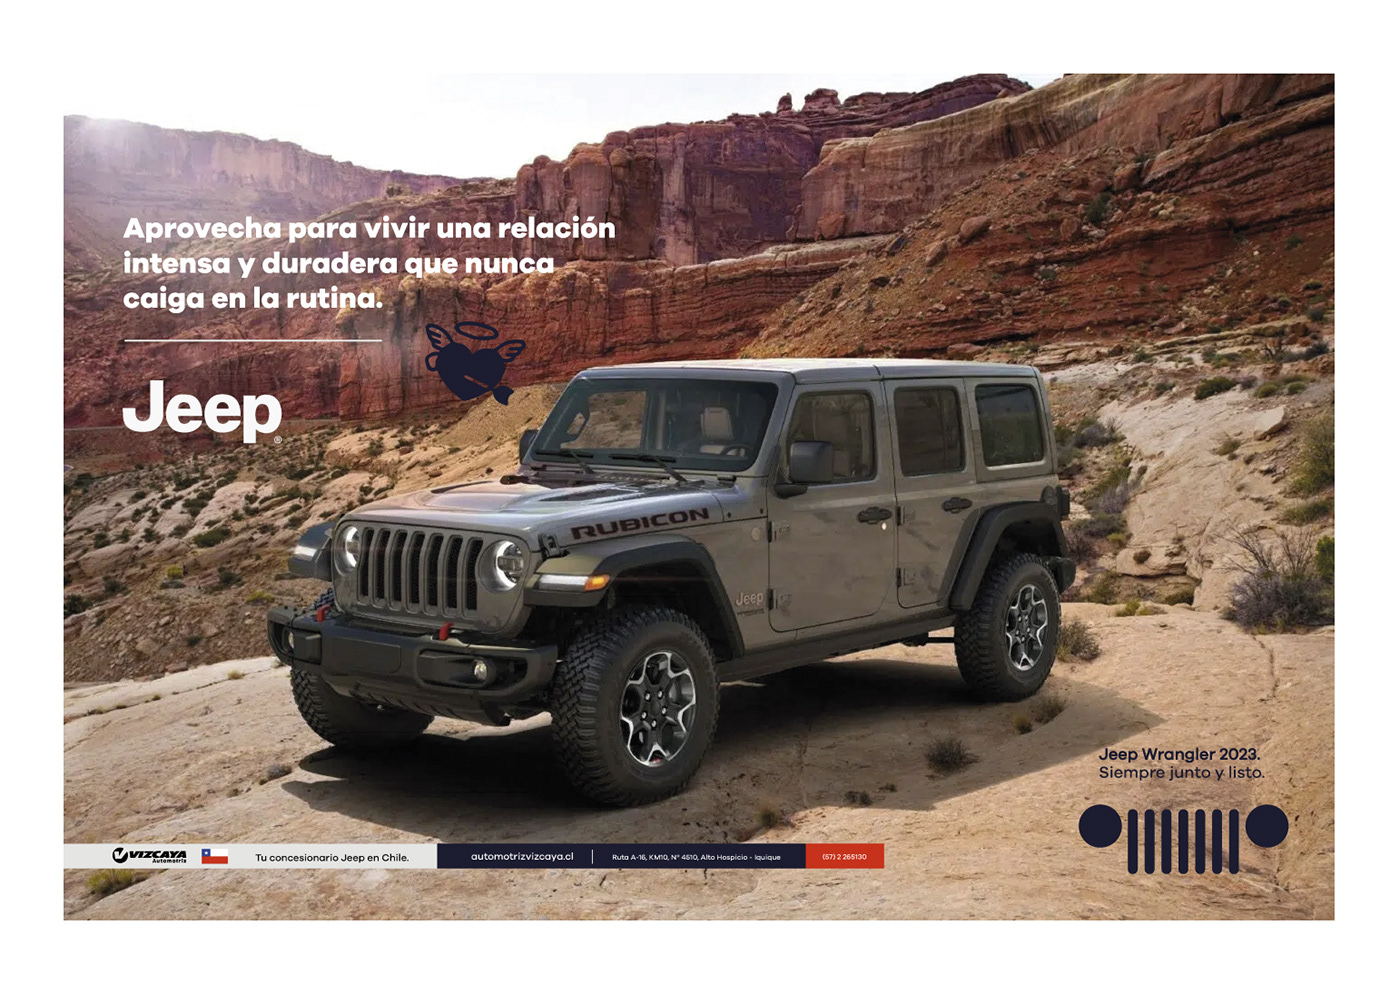 jeep wrangler jeep car Vehicle Advertising  Offroad 4x4 adventure chile Travel